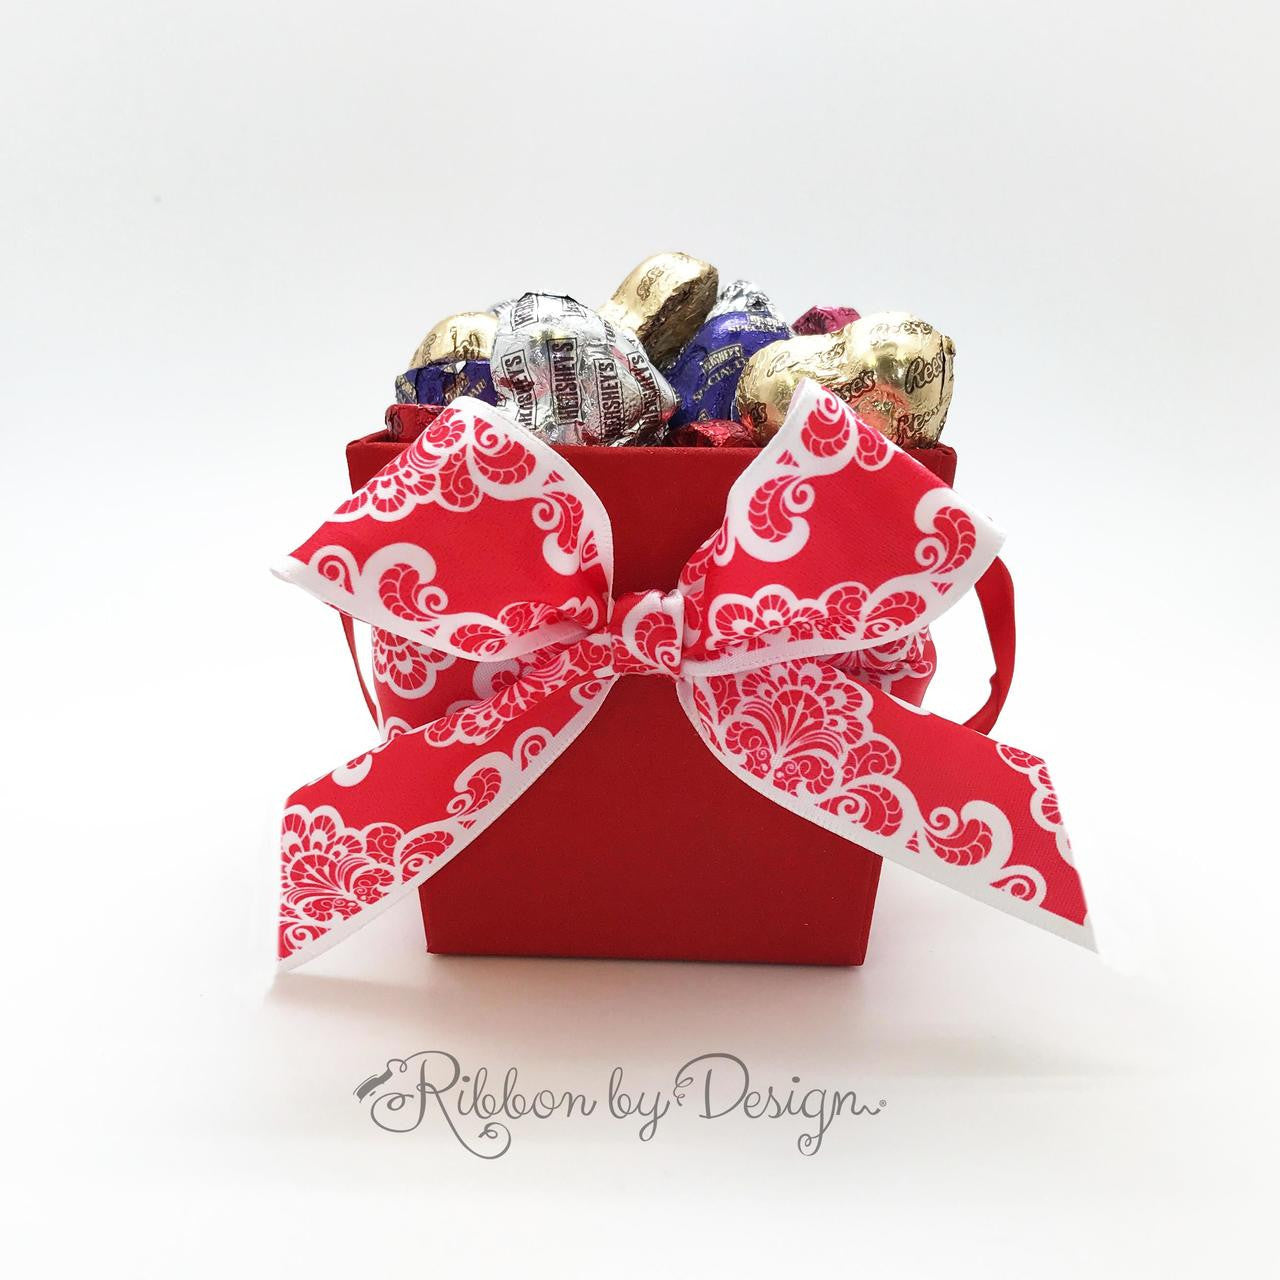 This little box of candy is made so very pretty with our 1.5" wide Love Lace bow!